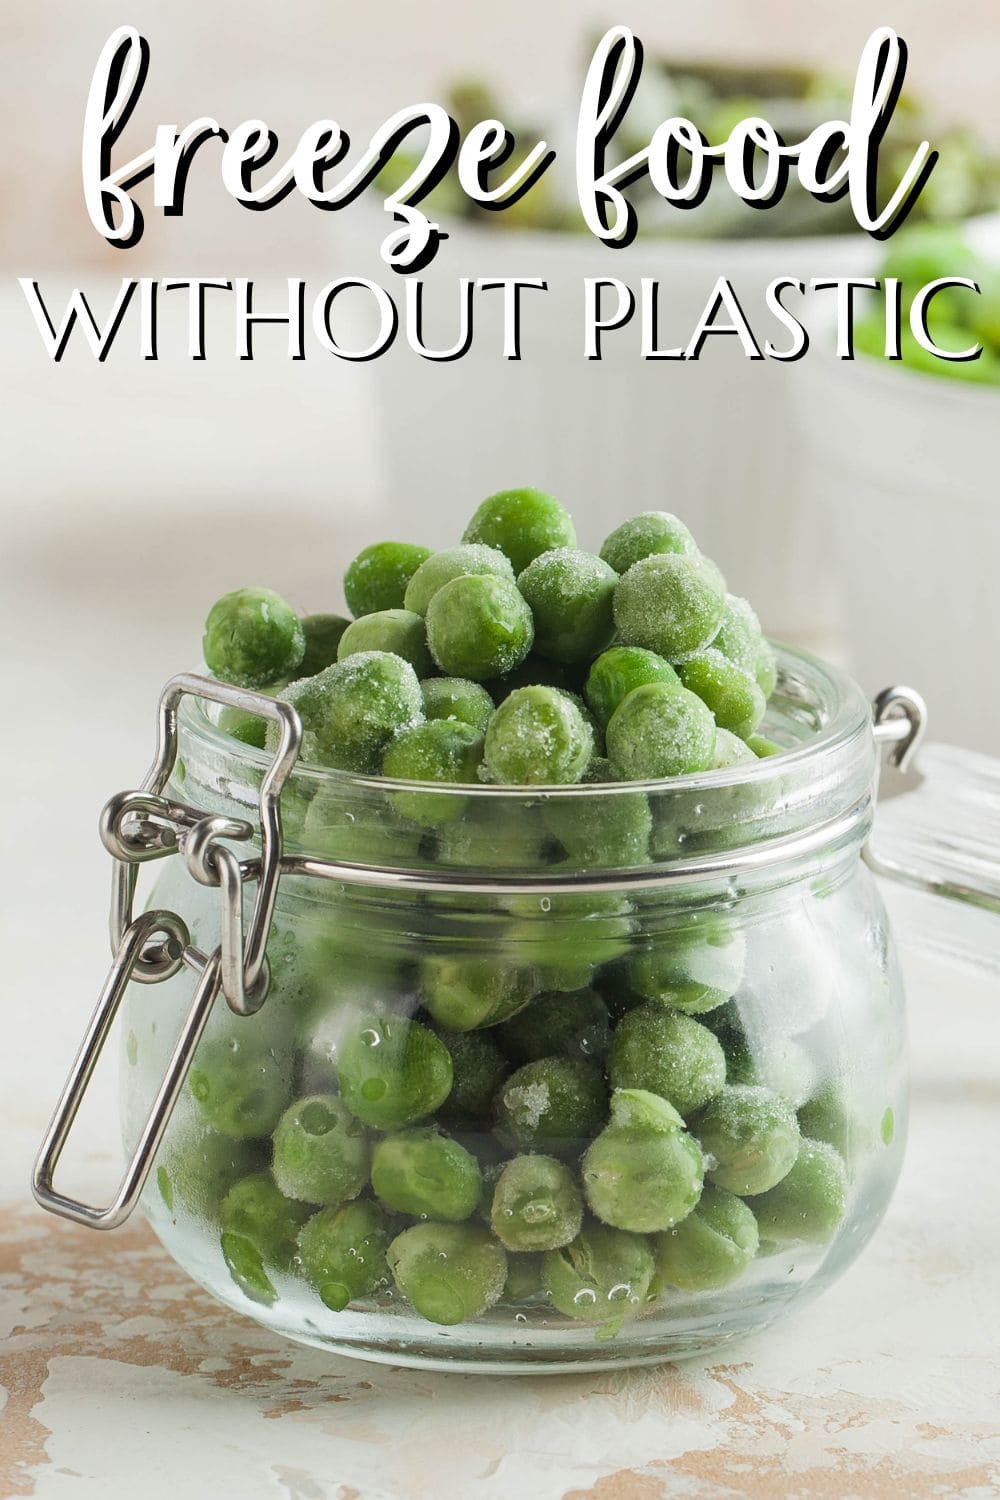 https://www.attainable-sustainable.net/wp-content/uploads/2018/09/freeze-food-without-plastic.jpg